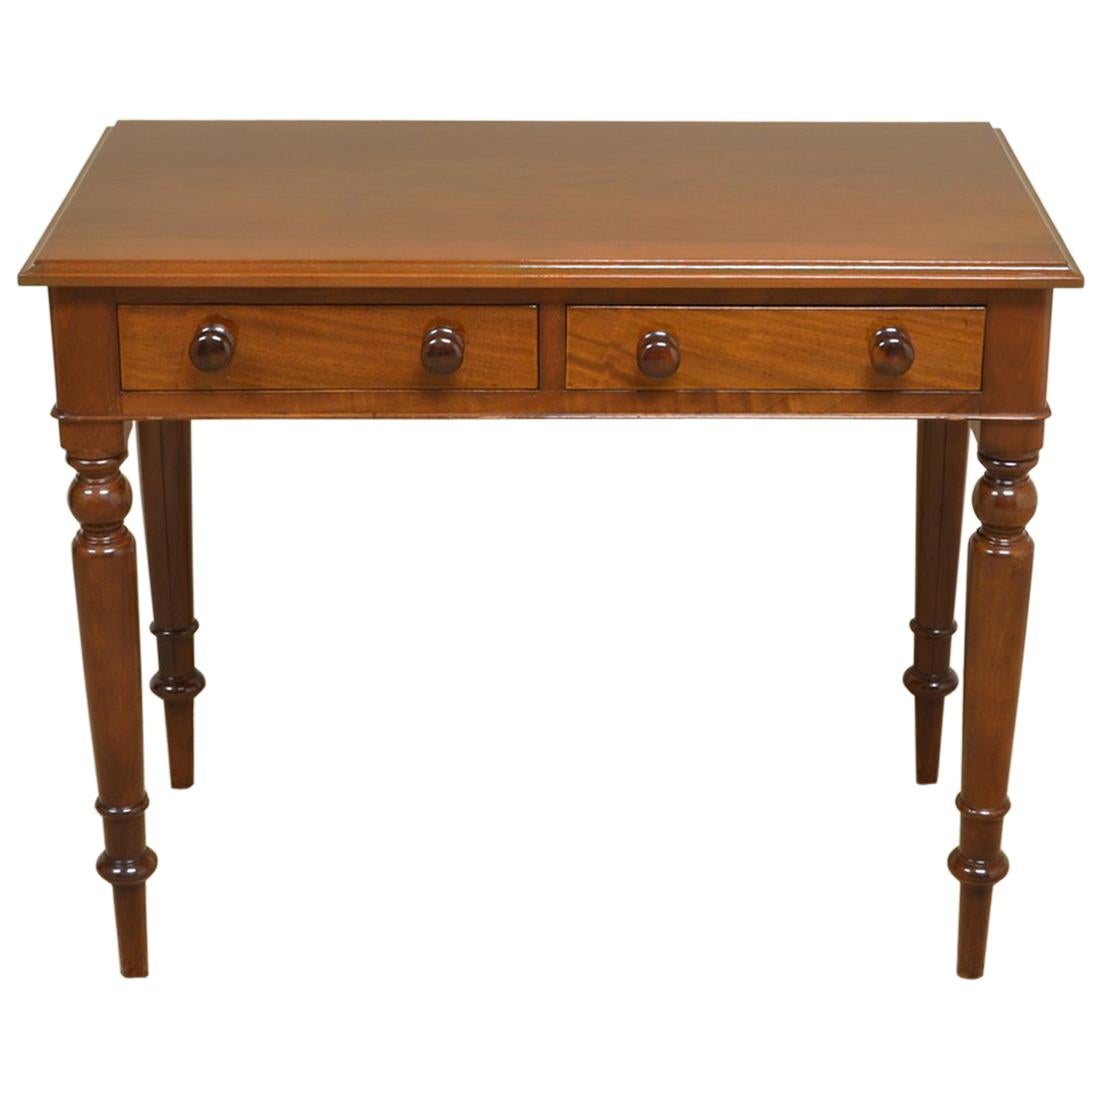 Victorian Mahogany Antique Side Table or Writing Table